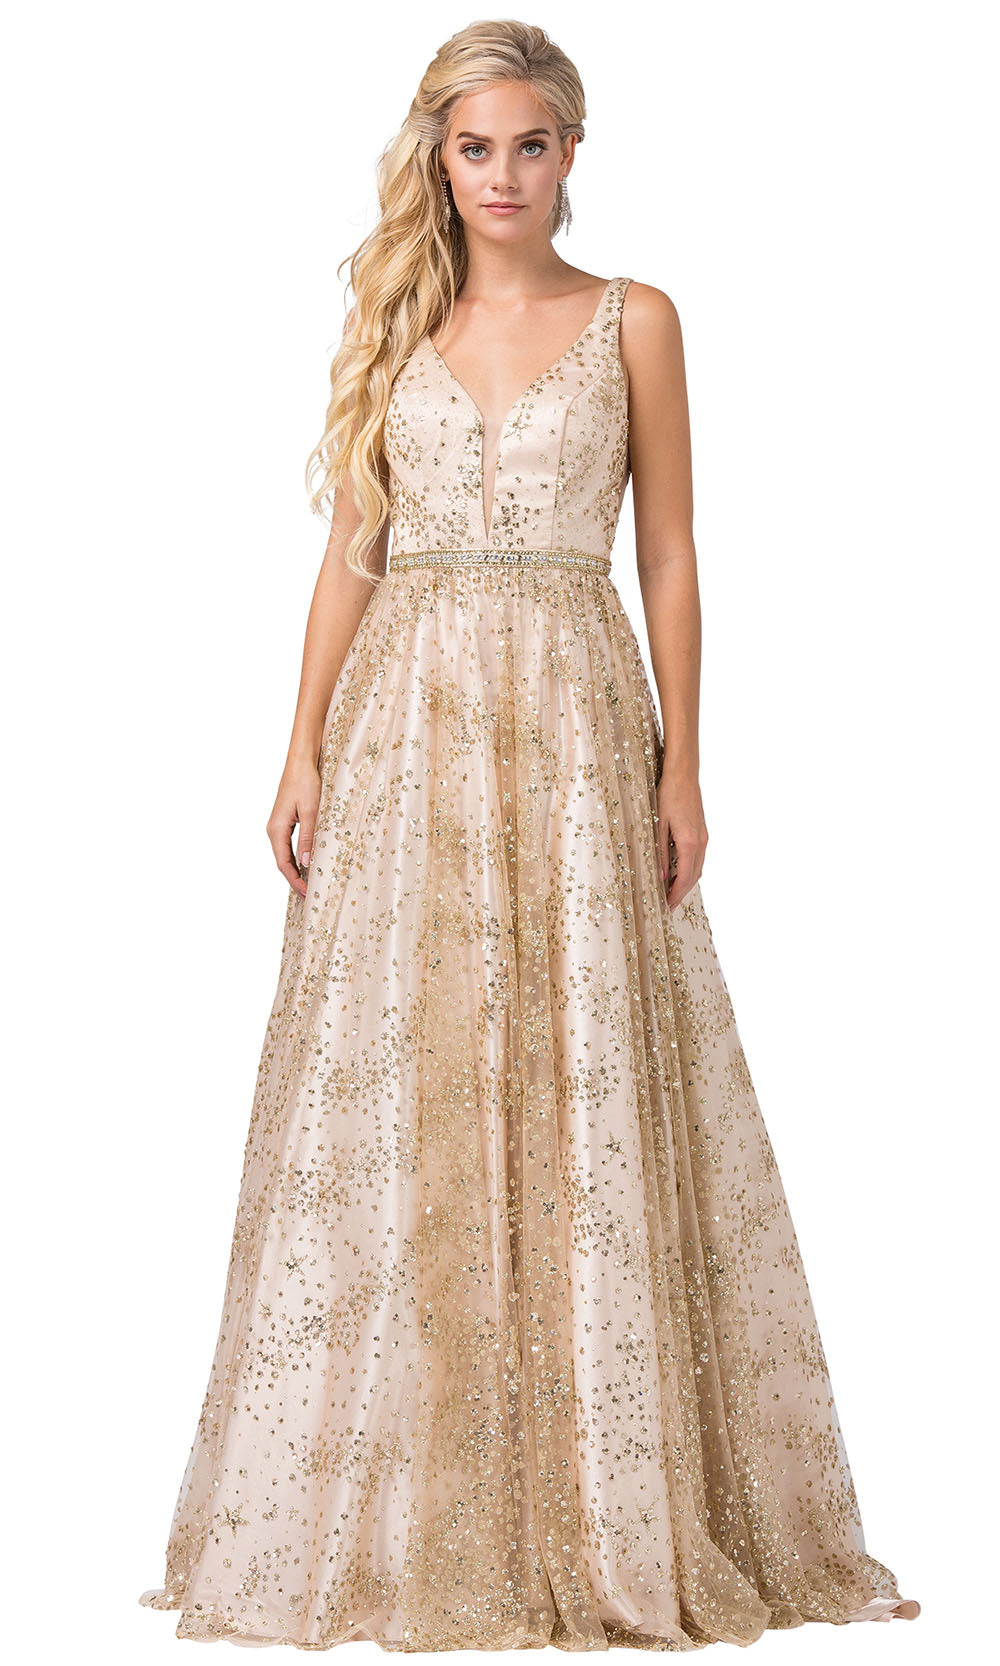 Dancing Queen - 2650 Plunging Glitter Accented A-Line Dress In Gold